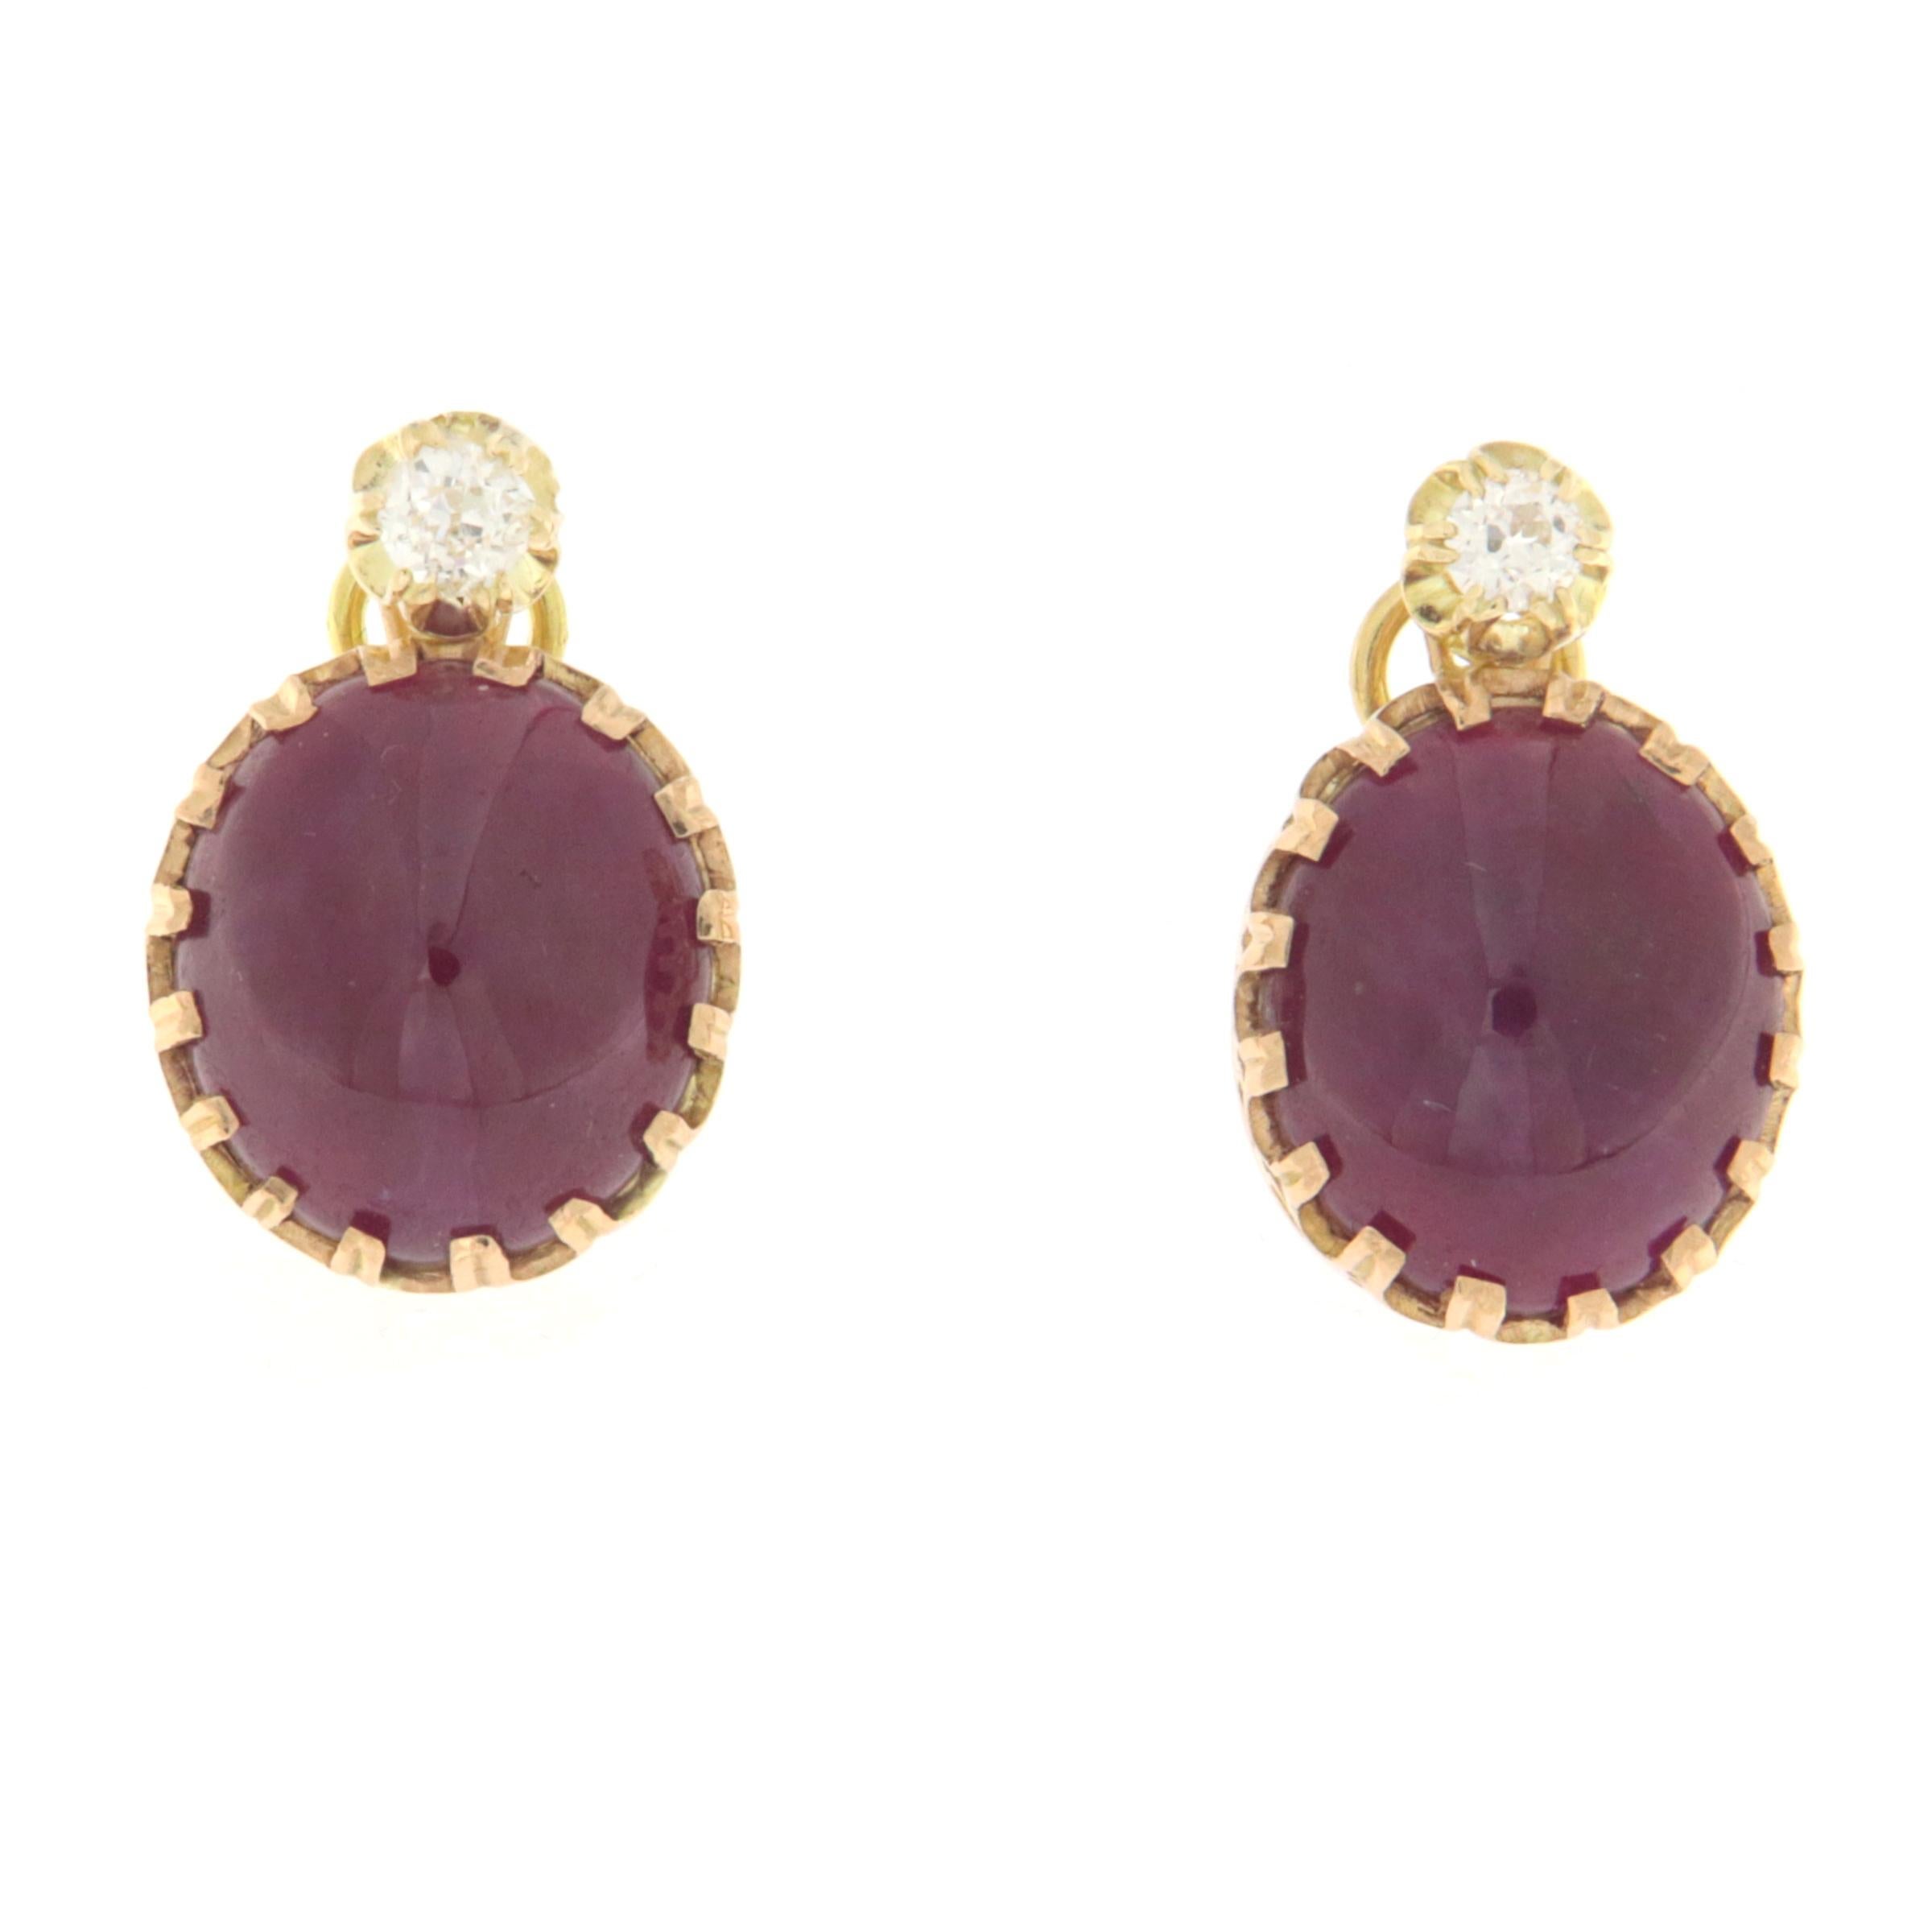 Amazing earrings in 18 karat yellow gold 1980s style, Italian manufacture, mounted with diamonds and cabochon rubies

Diamonds weight 0.40 karat
Cabochon Rubies weight 36.10 karat
Earrings total weight 16.90 grams
